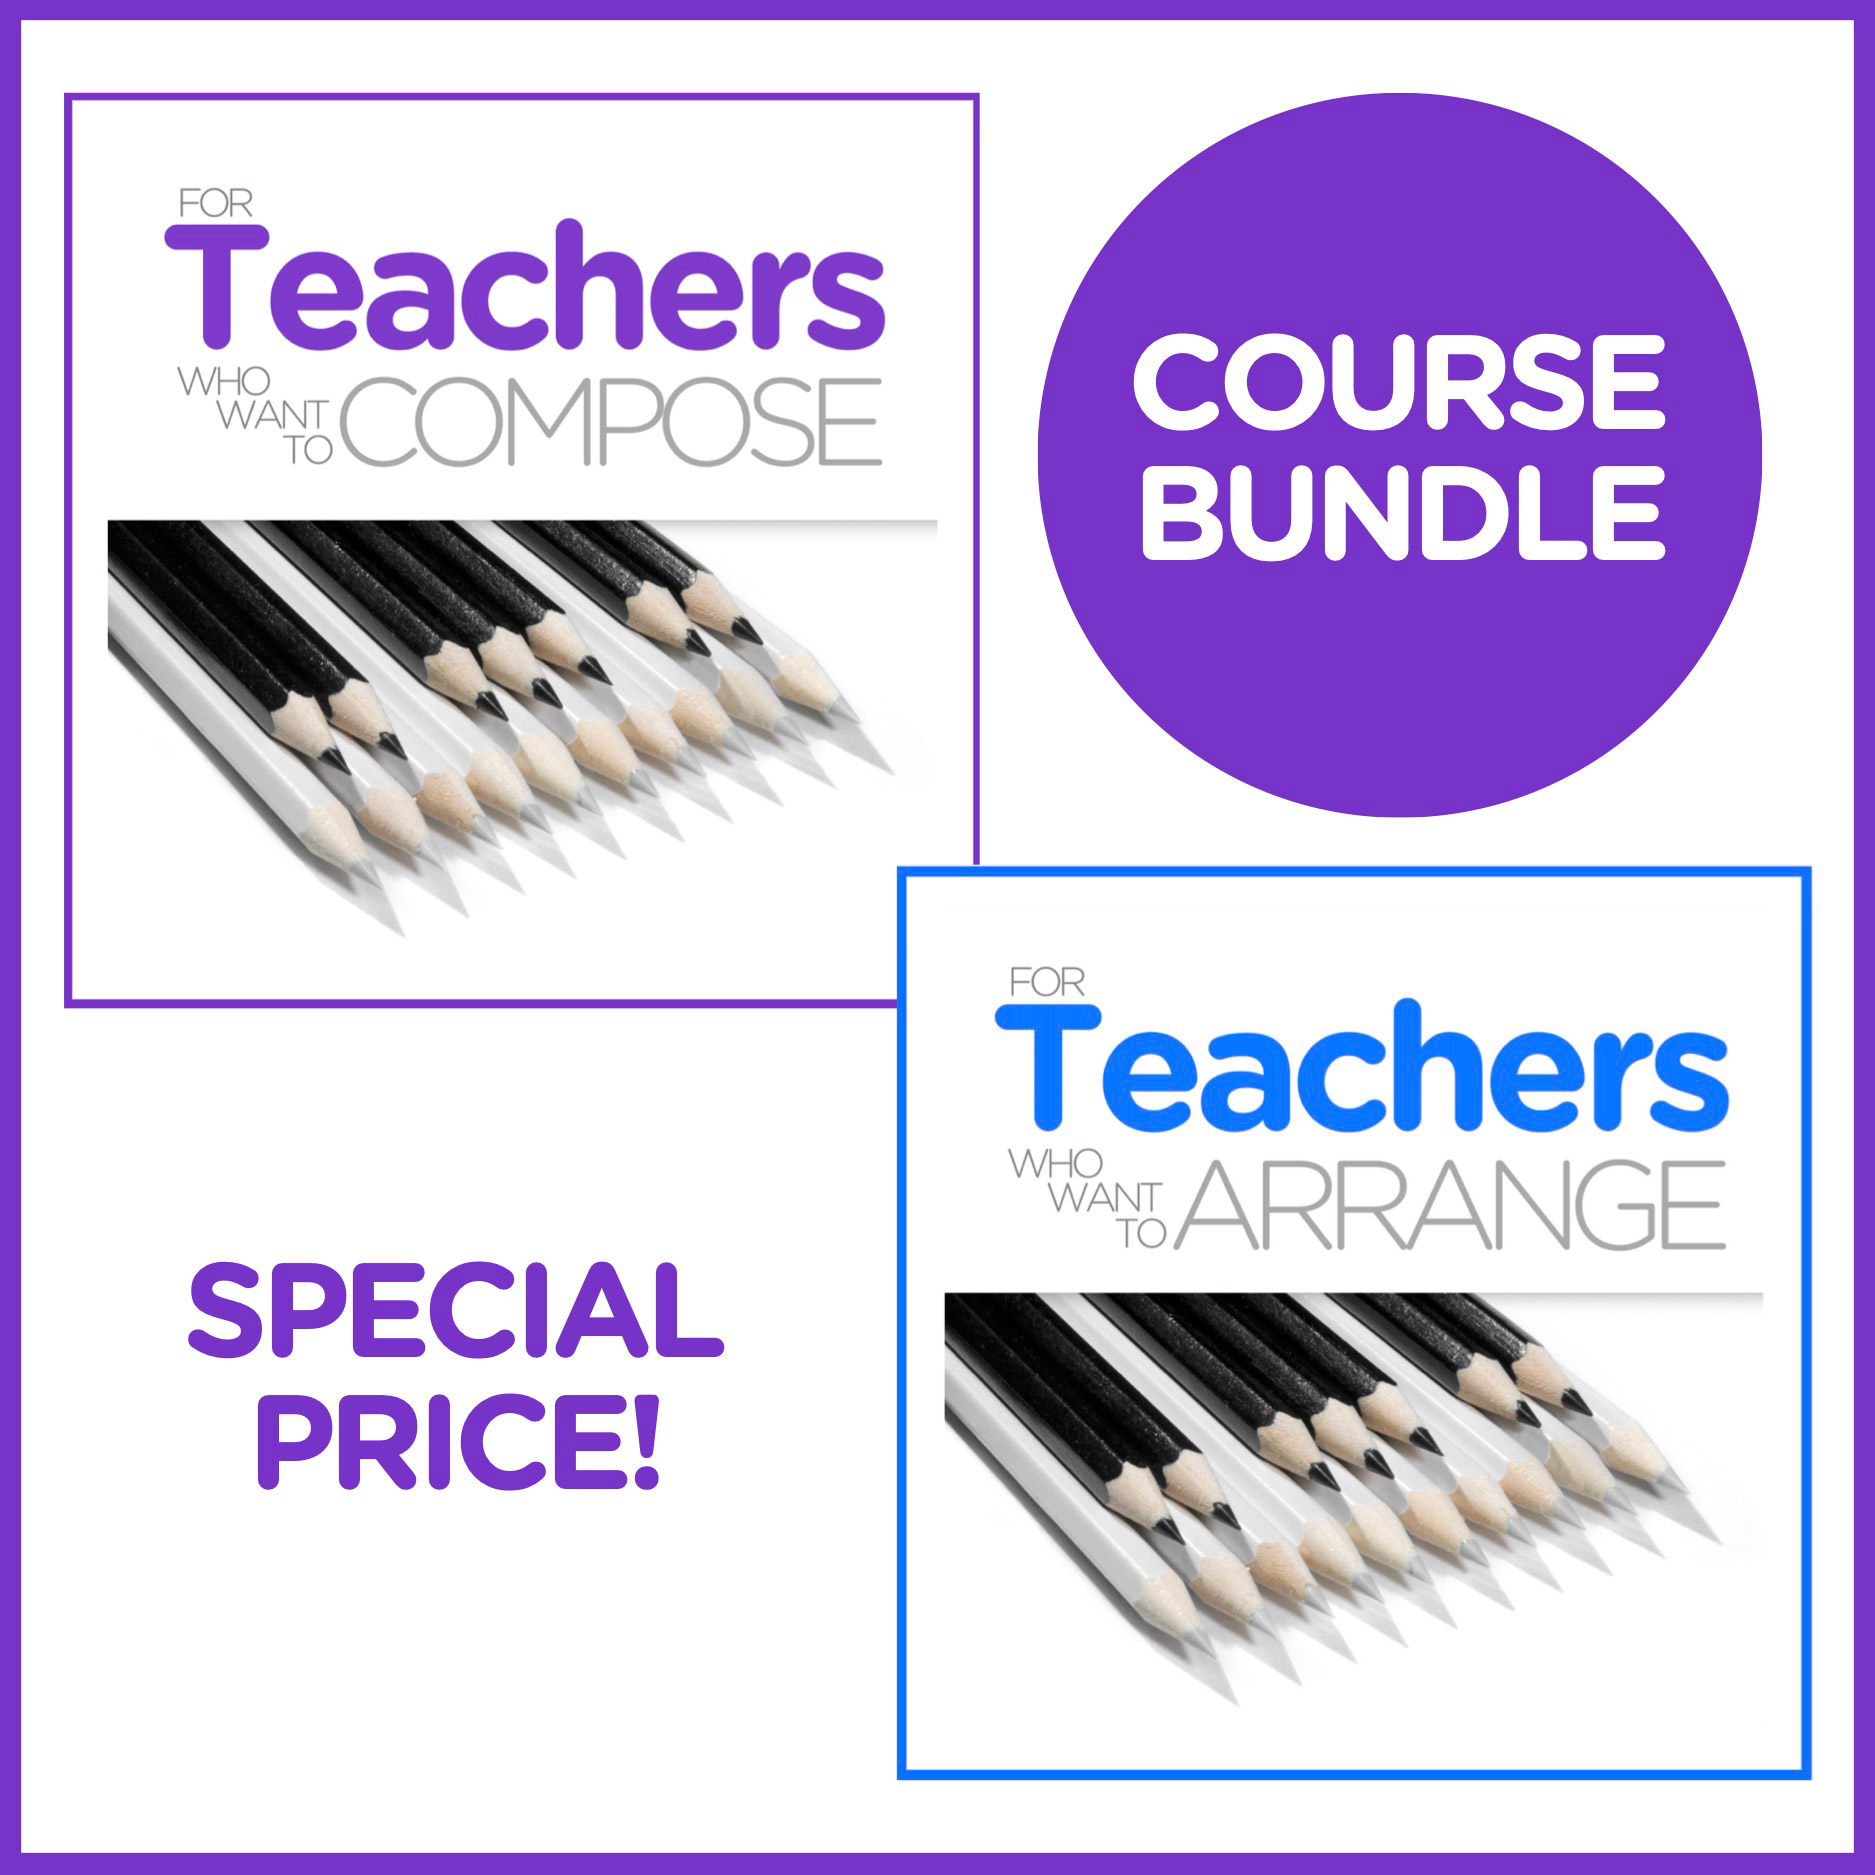 For Teachers Who Want To Compose and For Teachers Who Want To Arrange Bundle-Graphic